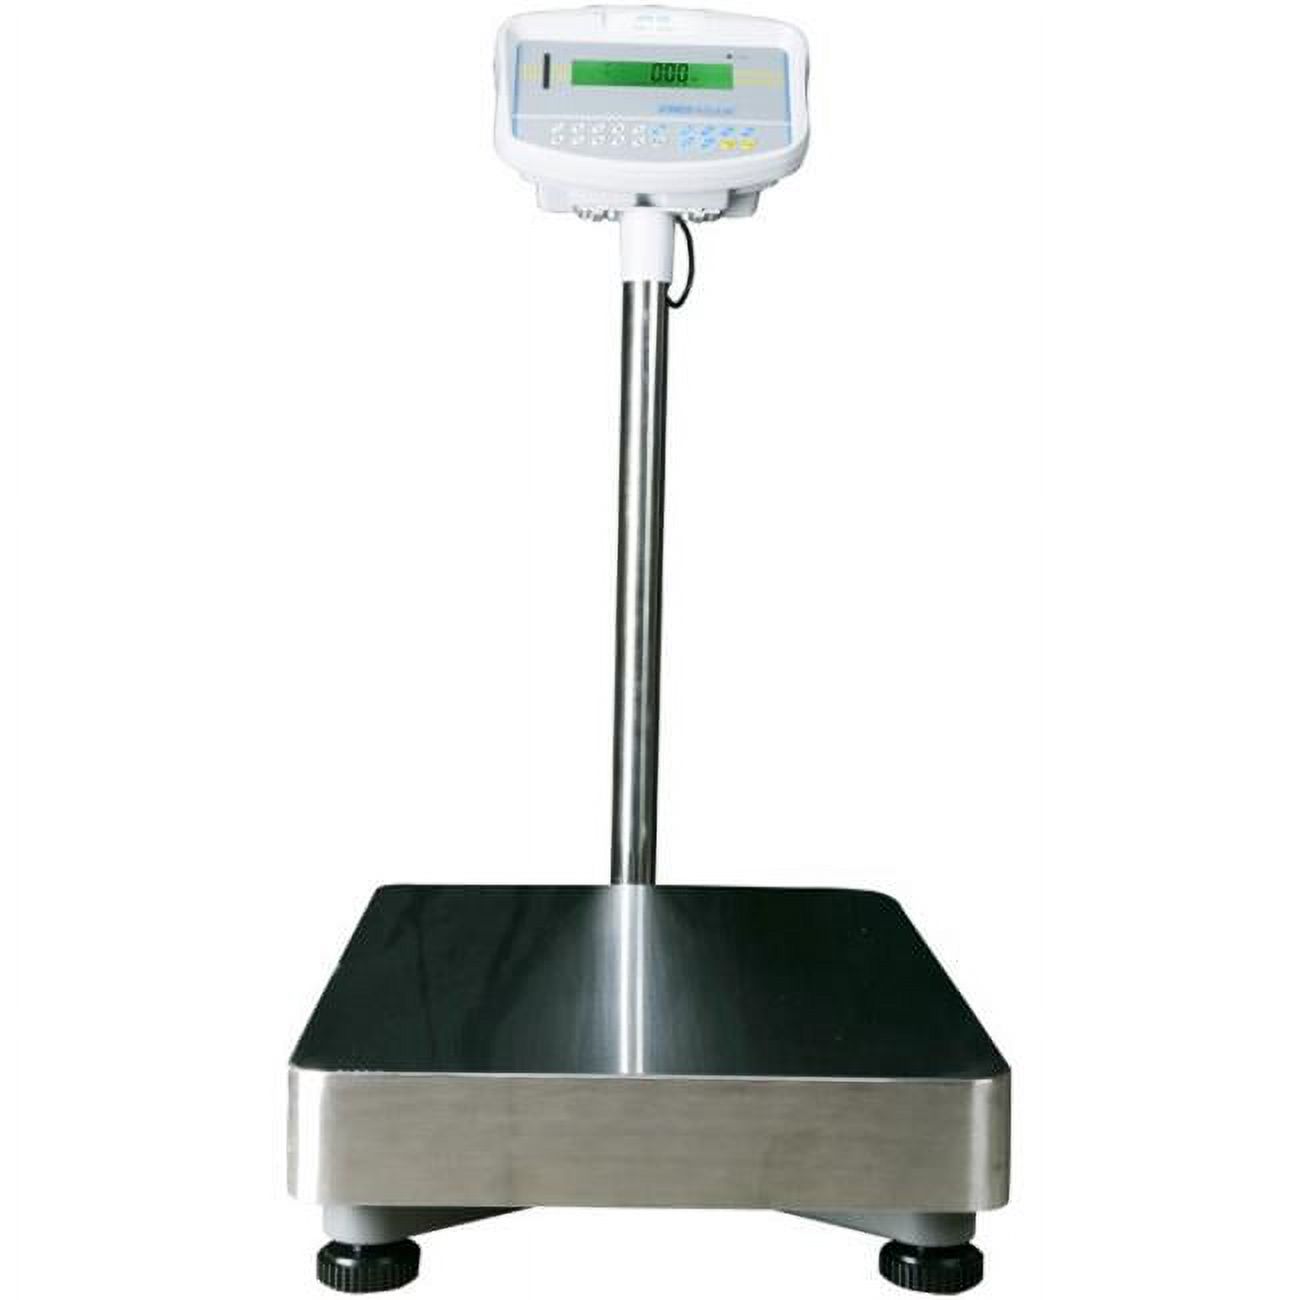 Adam Equipment GFK 330a Counting Scale - image 1 of 1